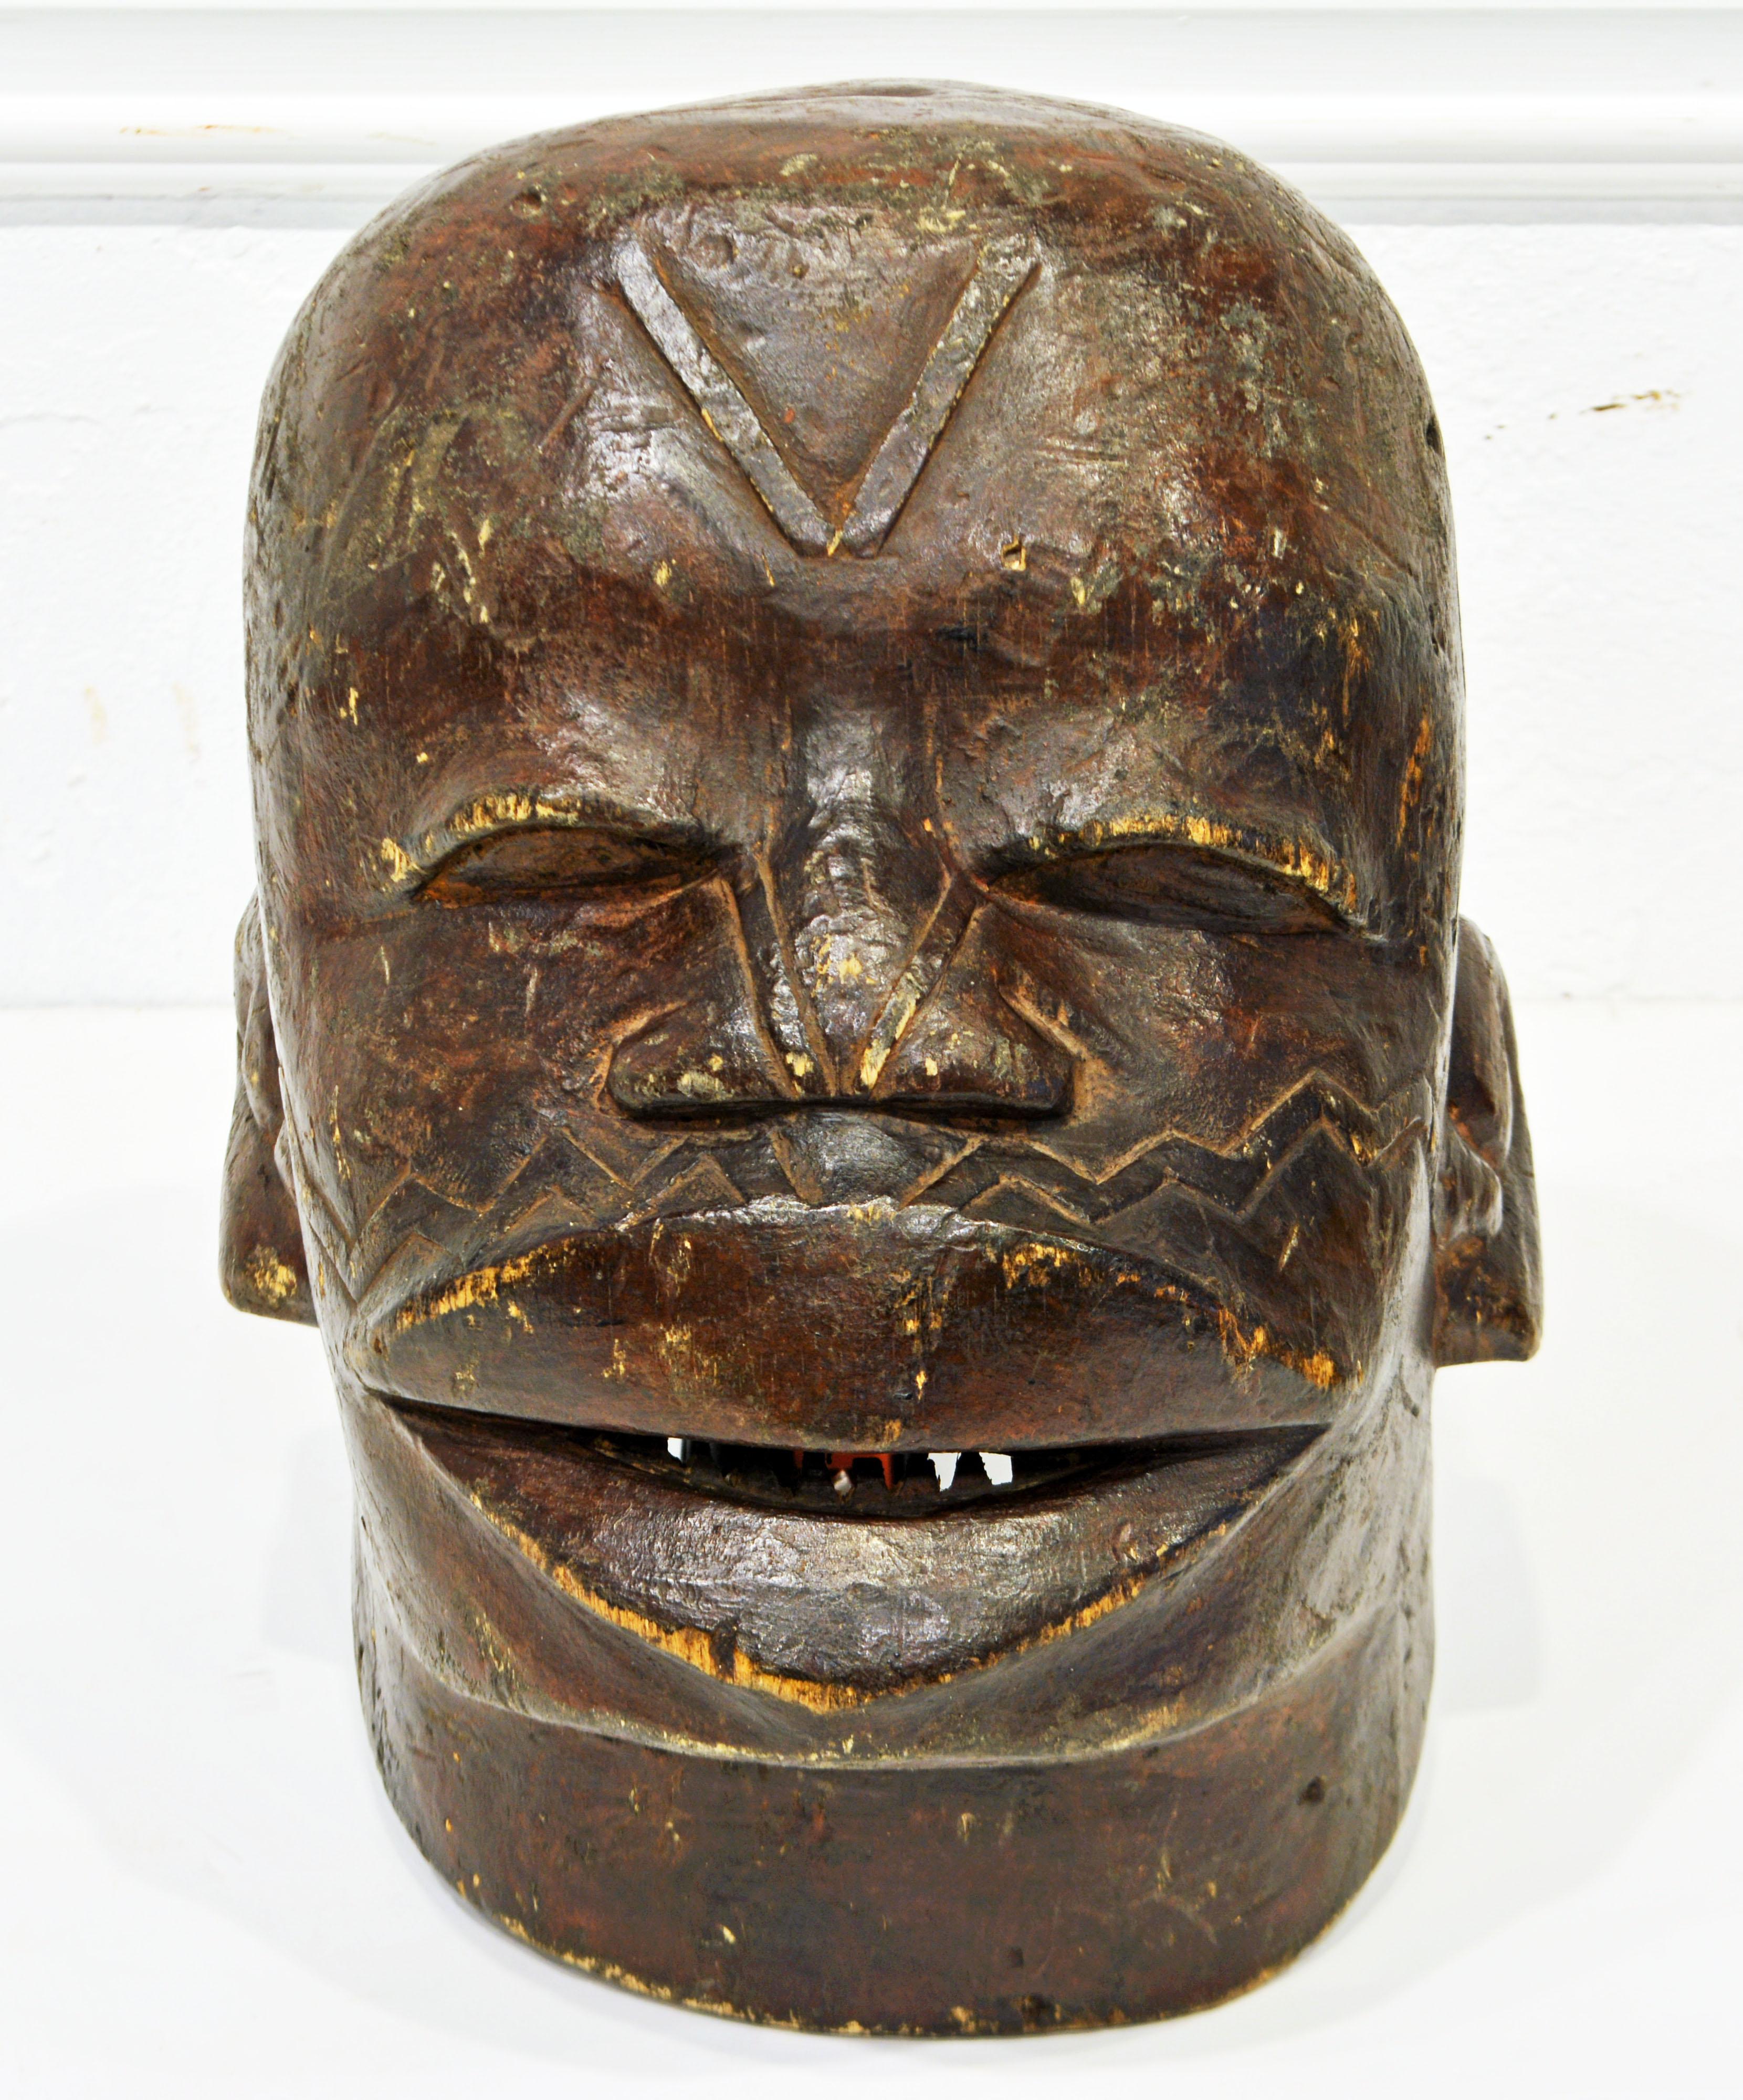 This expressive Maconde Helmet mask from Mozambique or Tanzania (the Maconde people live in both countries) is carved in wood with good detail and traditional scarification marks in high relief. A dark surface treatment has been applied. These